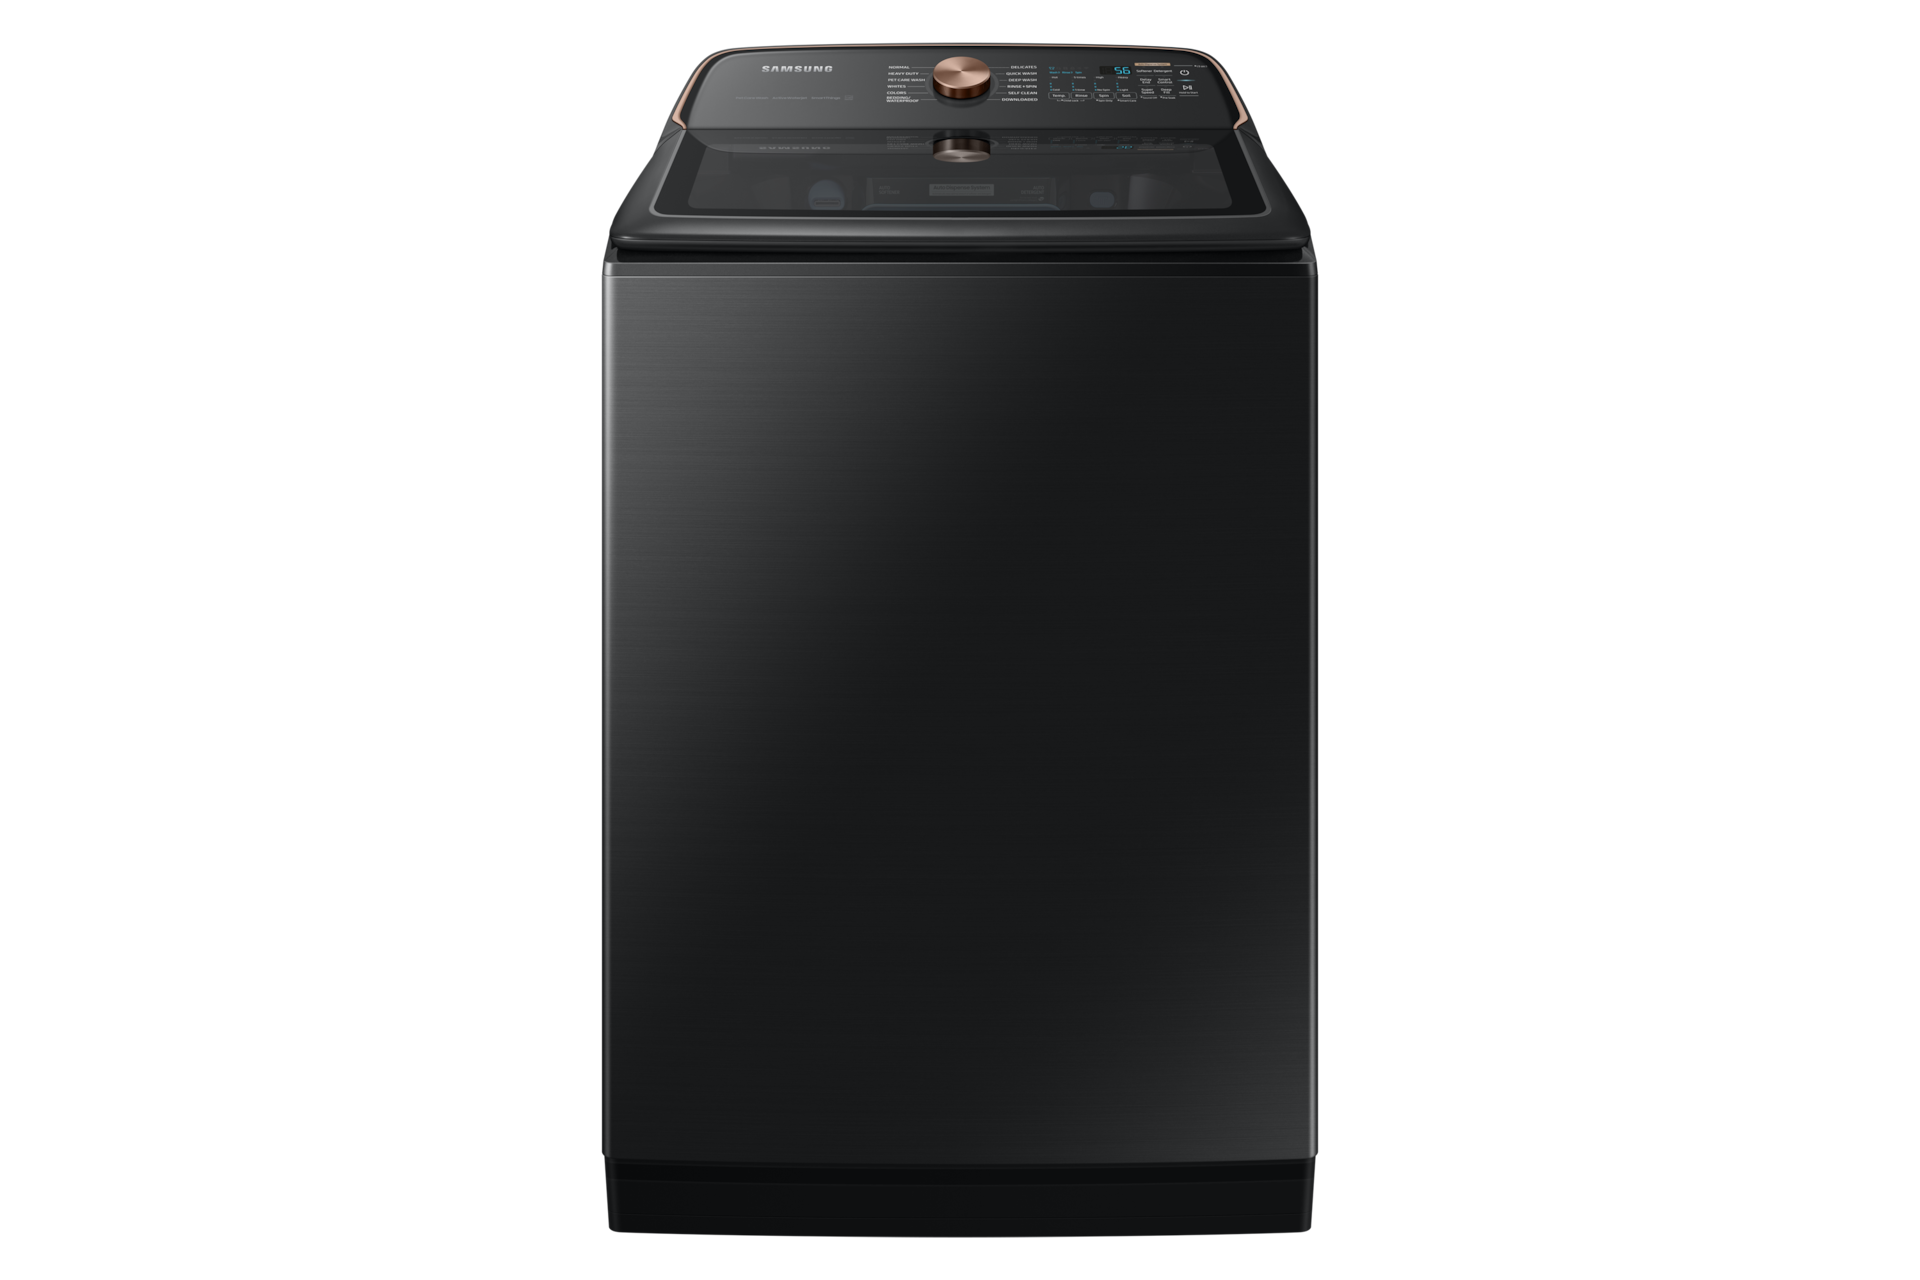 Image of Samsung 6.2 cu. ft. 7550 Series Top Load Washer with Auto Dispense System